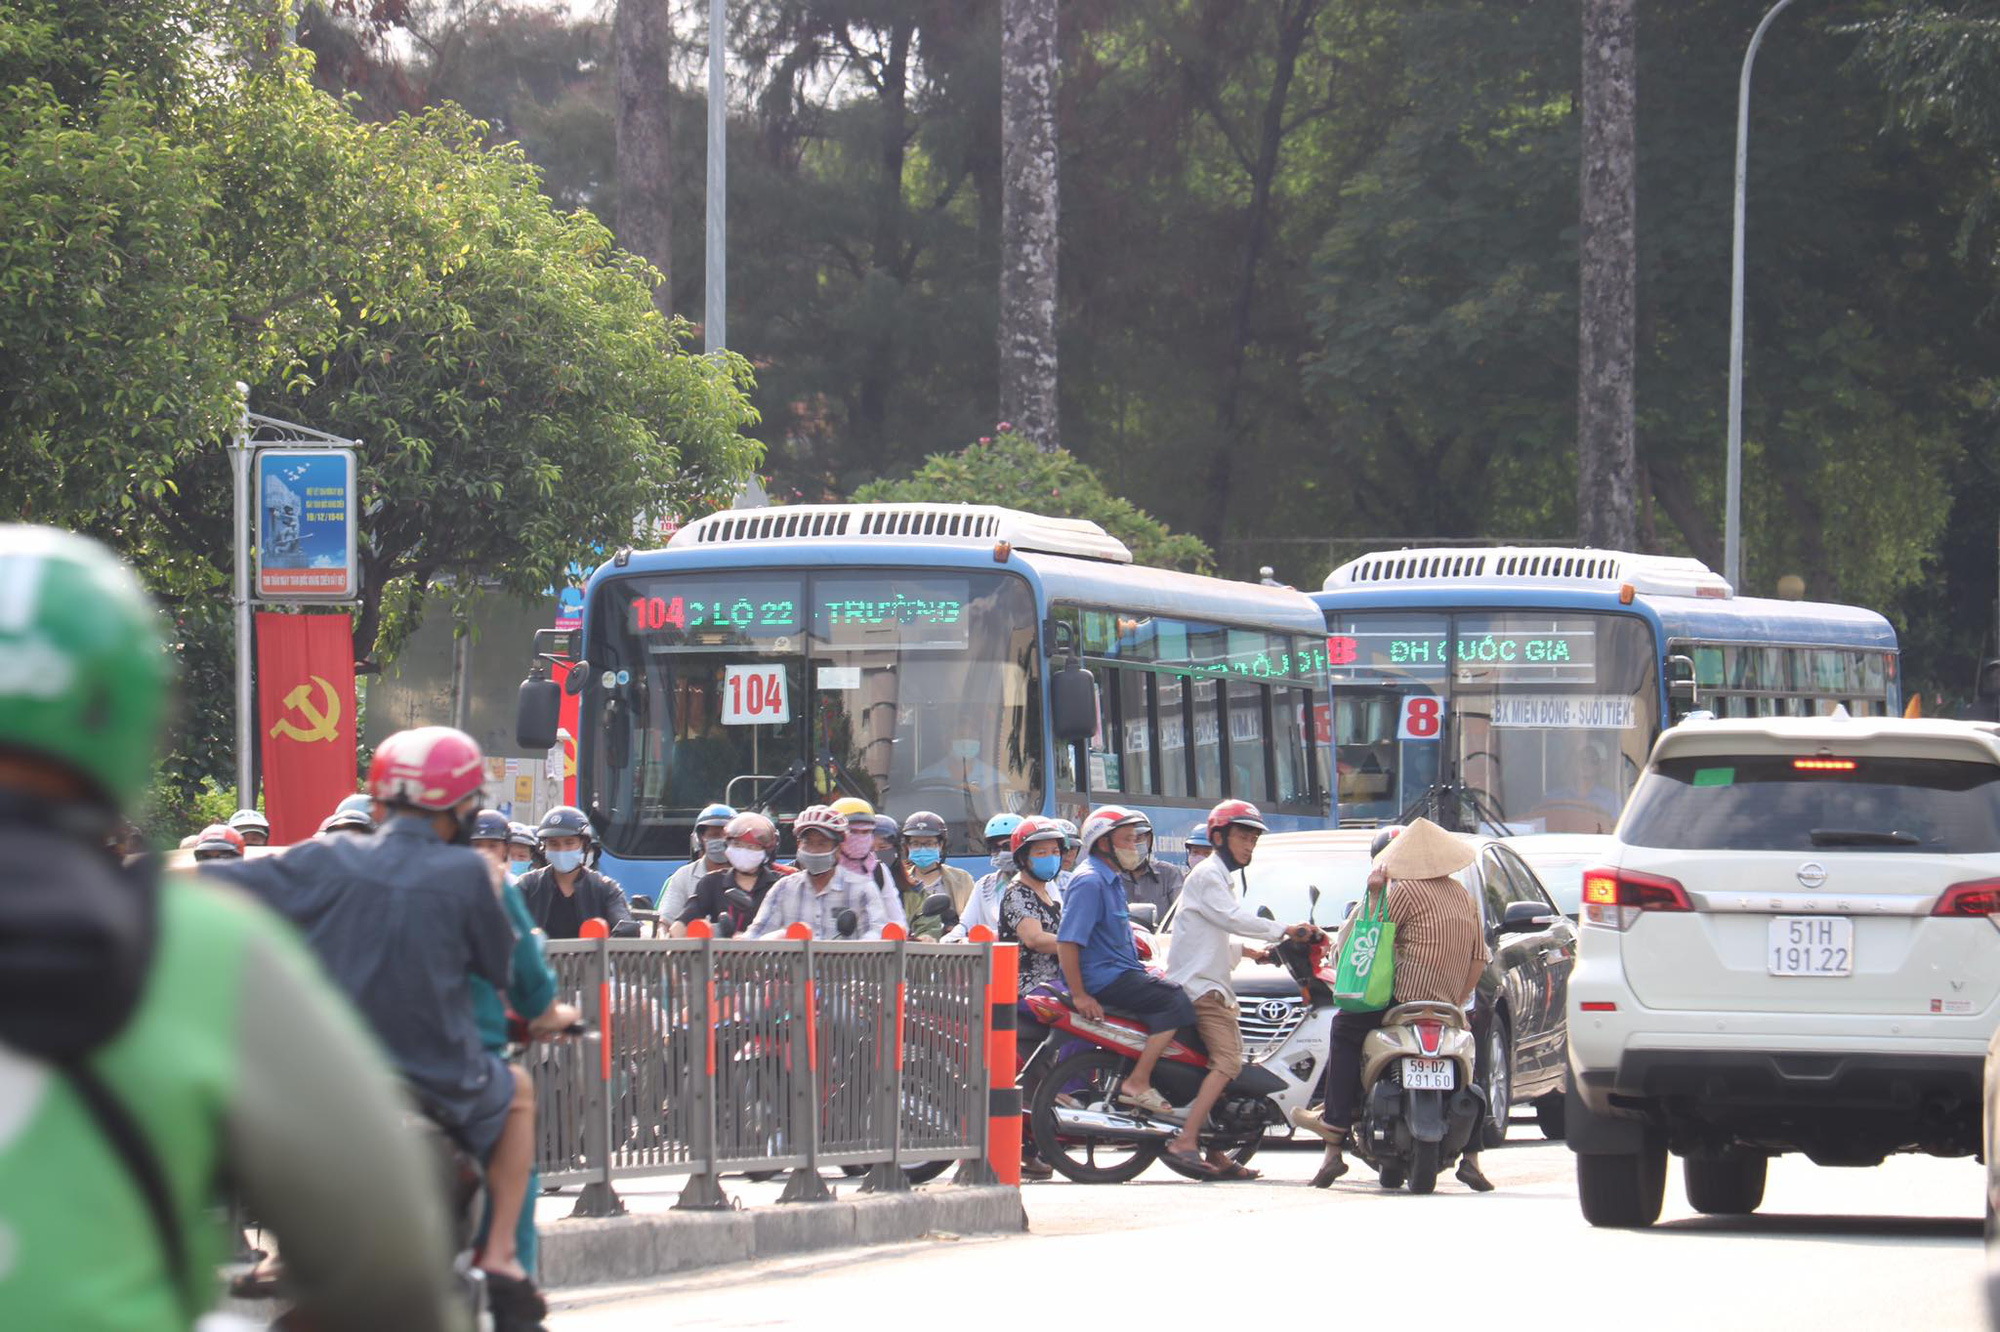 Buses are seen on a street in Ho Chi Minh City, Vietnam. Photo: Ngoc Phuong / Tuoi Tre